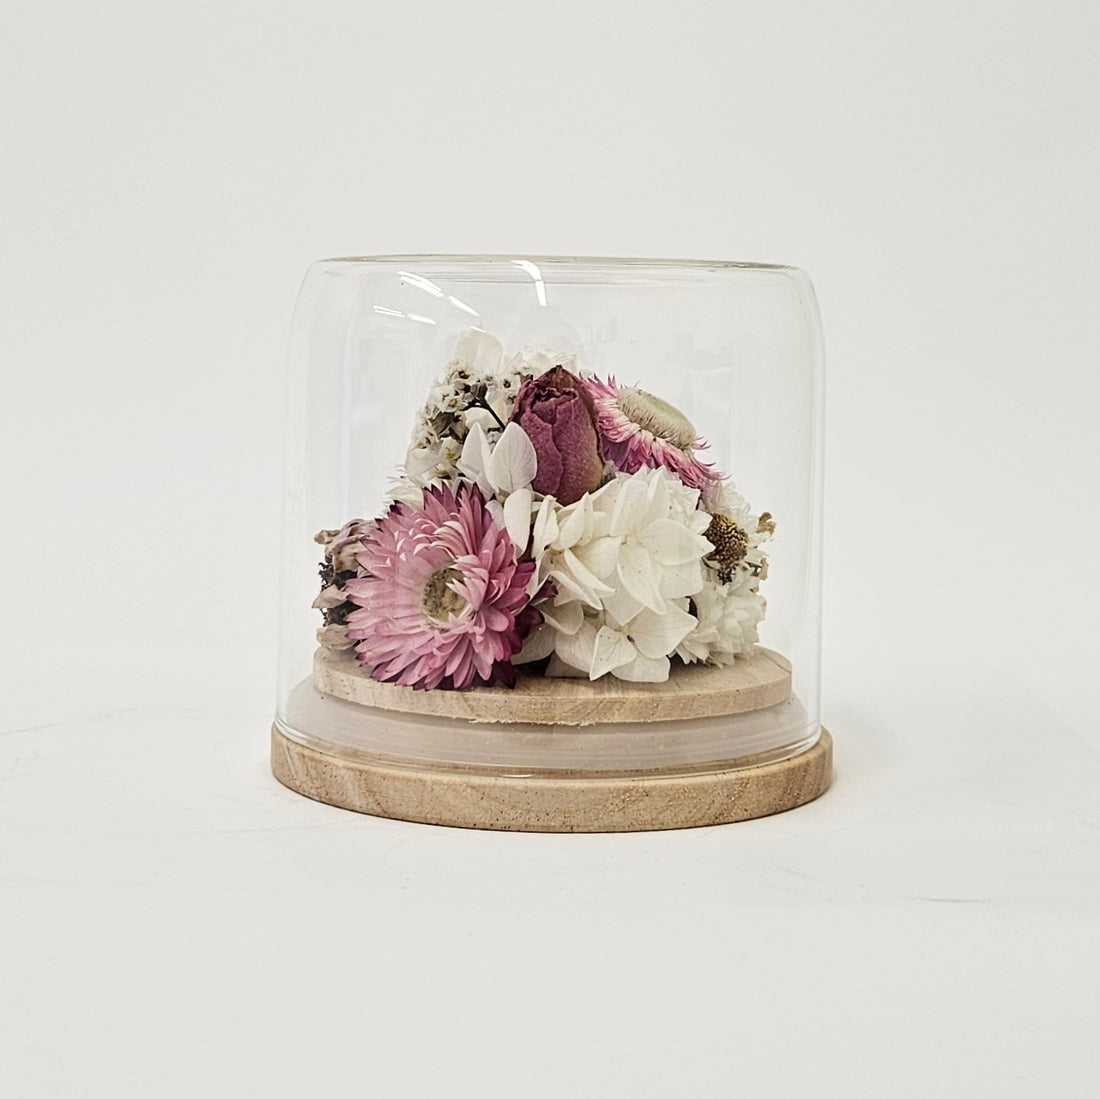 Floral Dome Kit with purple and white dried flower upon wooden base.